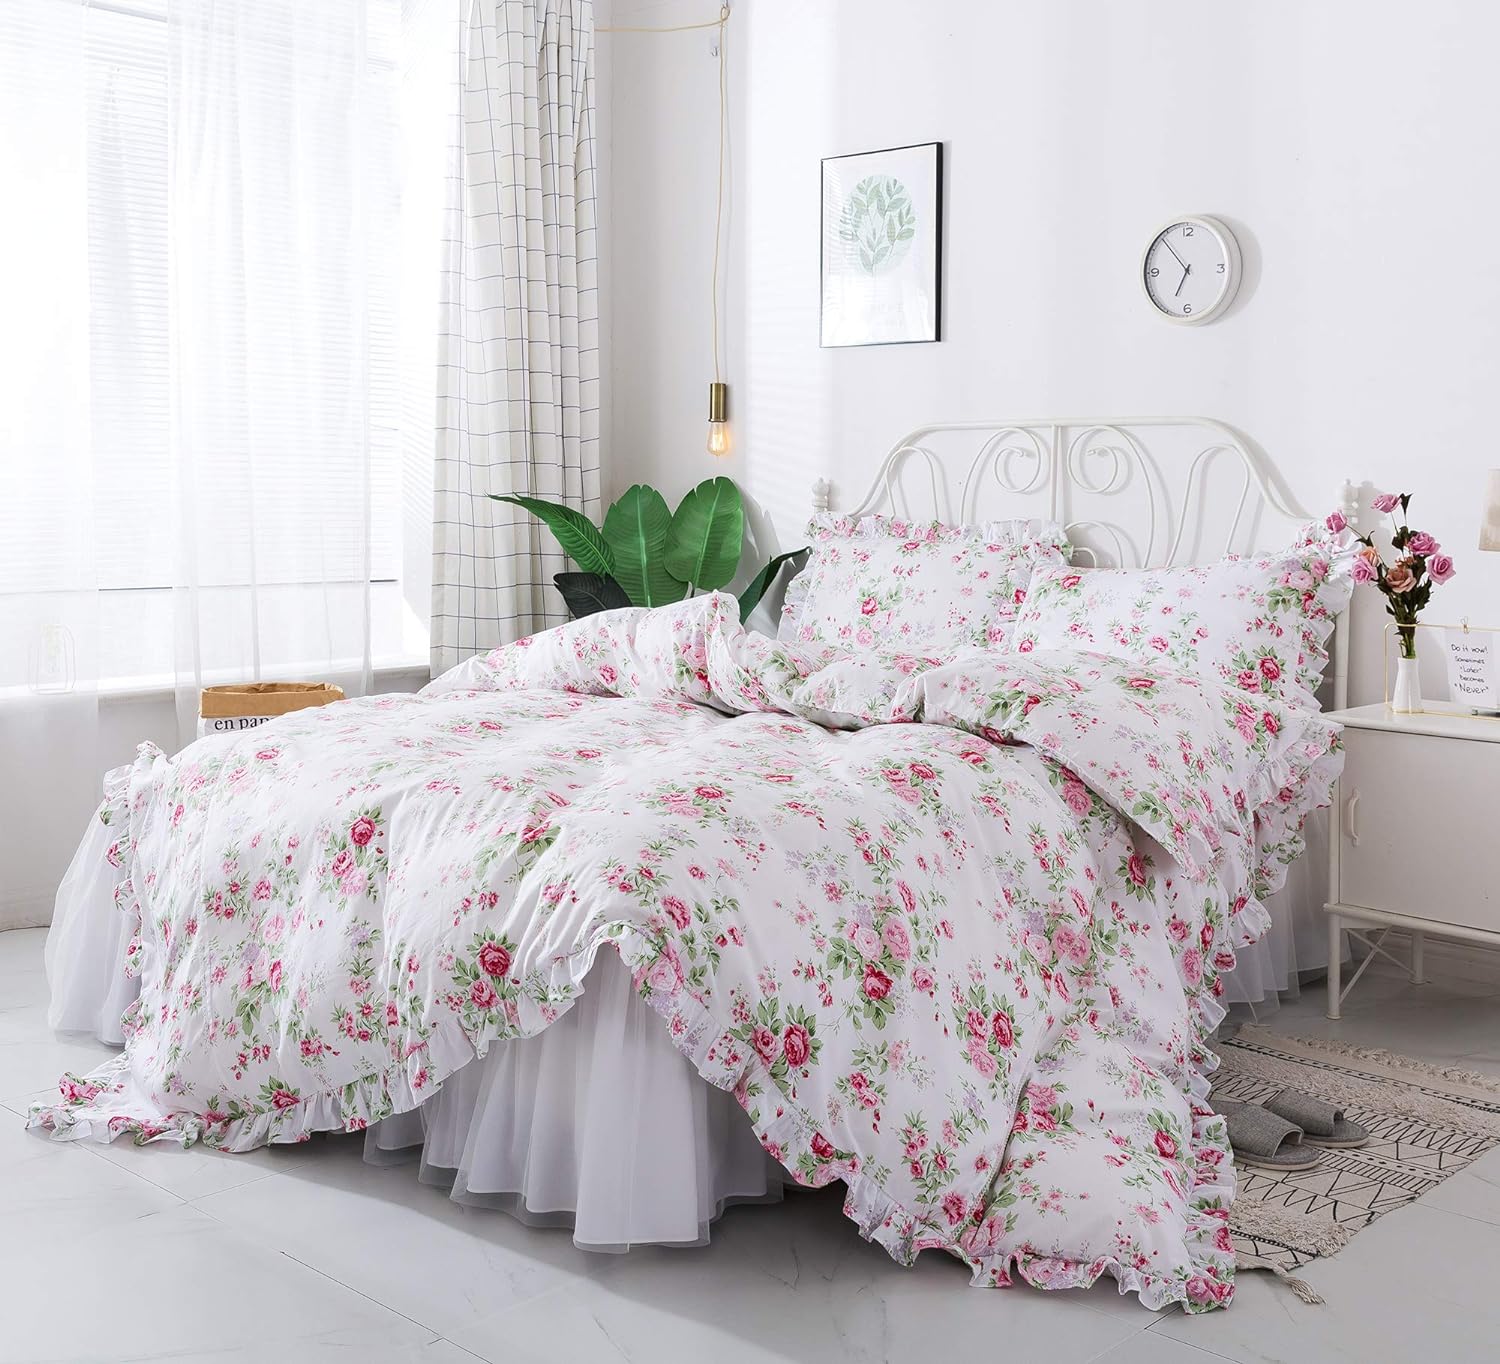 FADFAY Elegant and Shabby Duvet Cover Floral Bedding Set Bulgaria Rose with Sheer Bedskirt Exquisite Craft 100% Cotton,Queen Size 4 Pieces